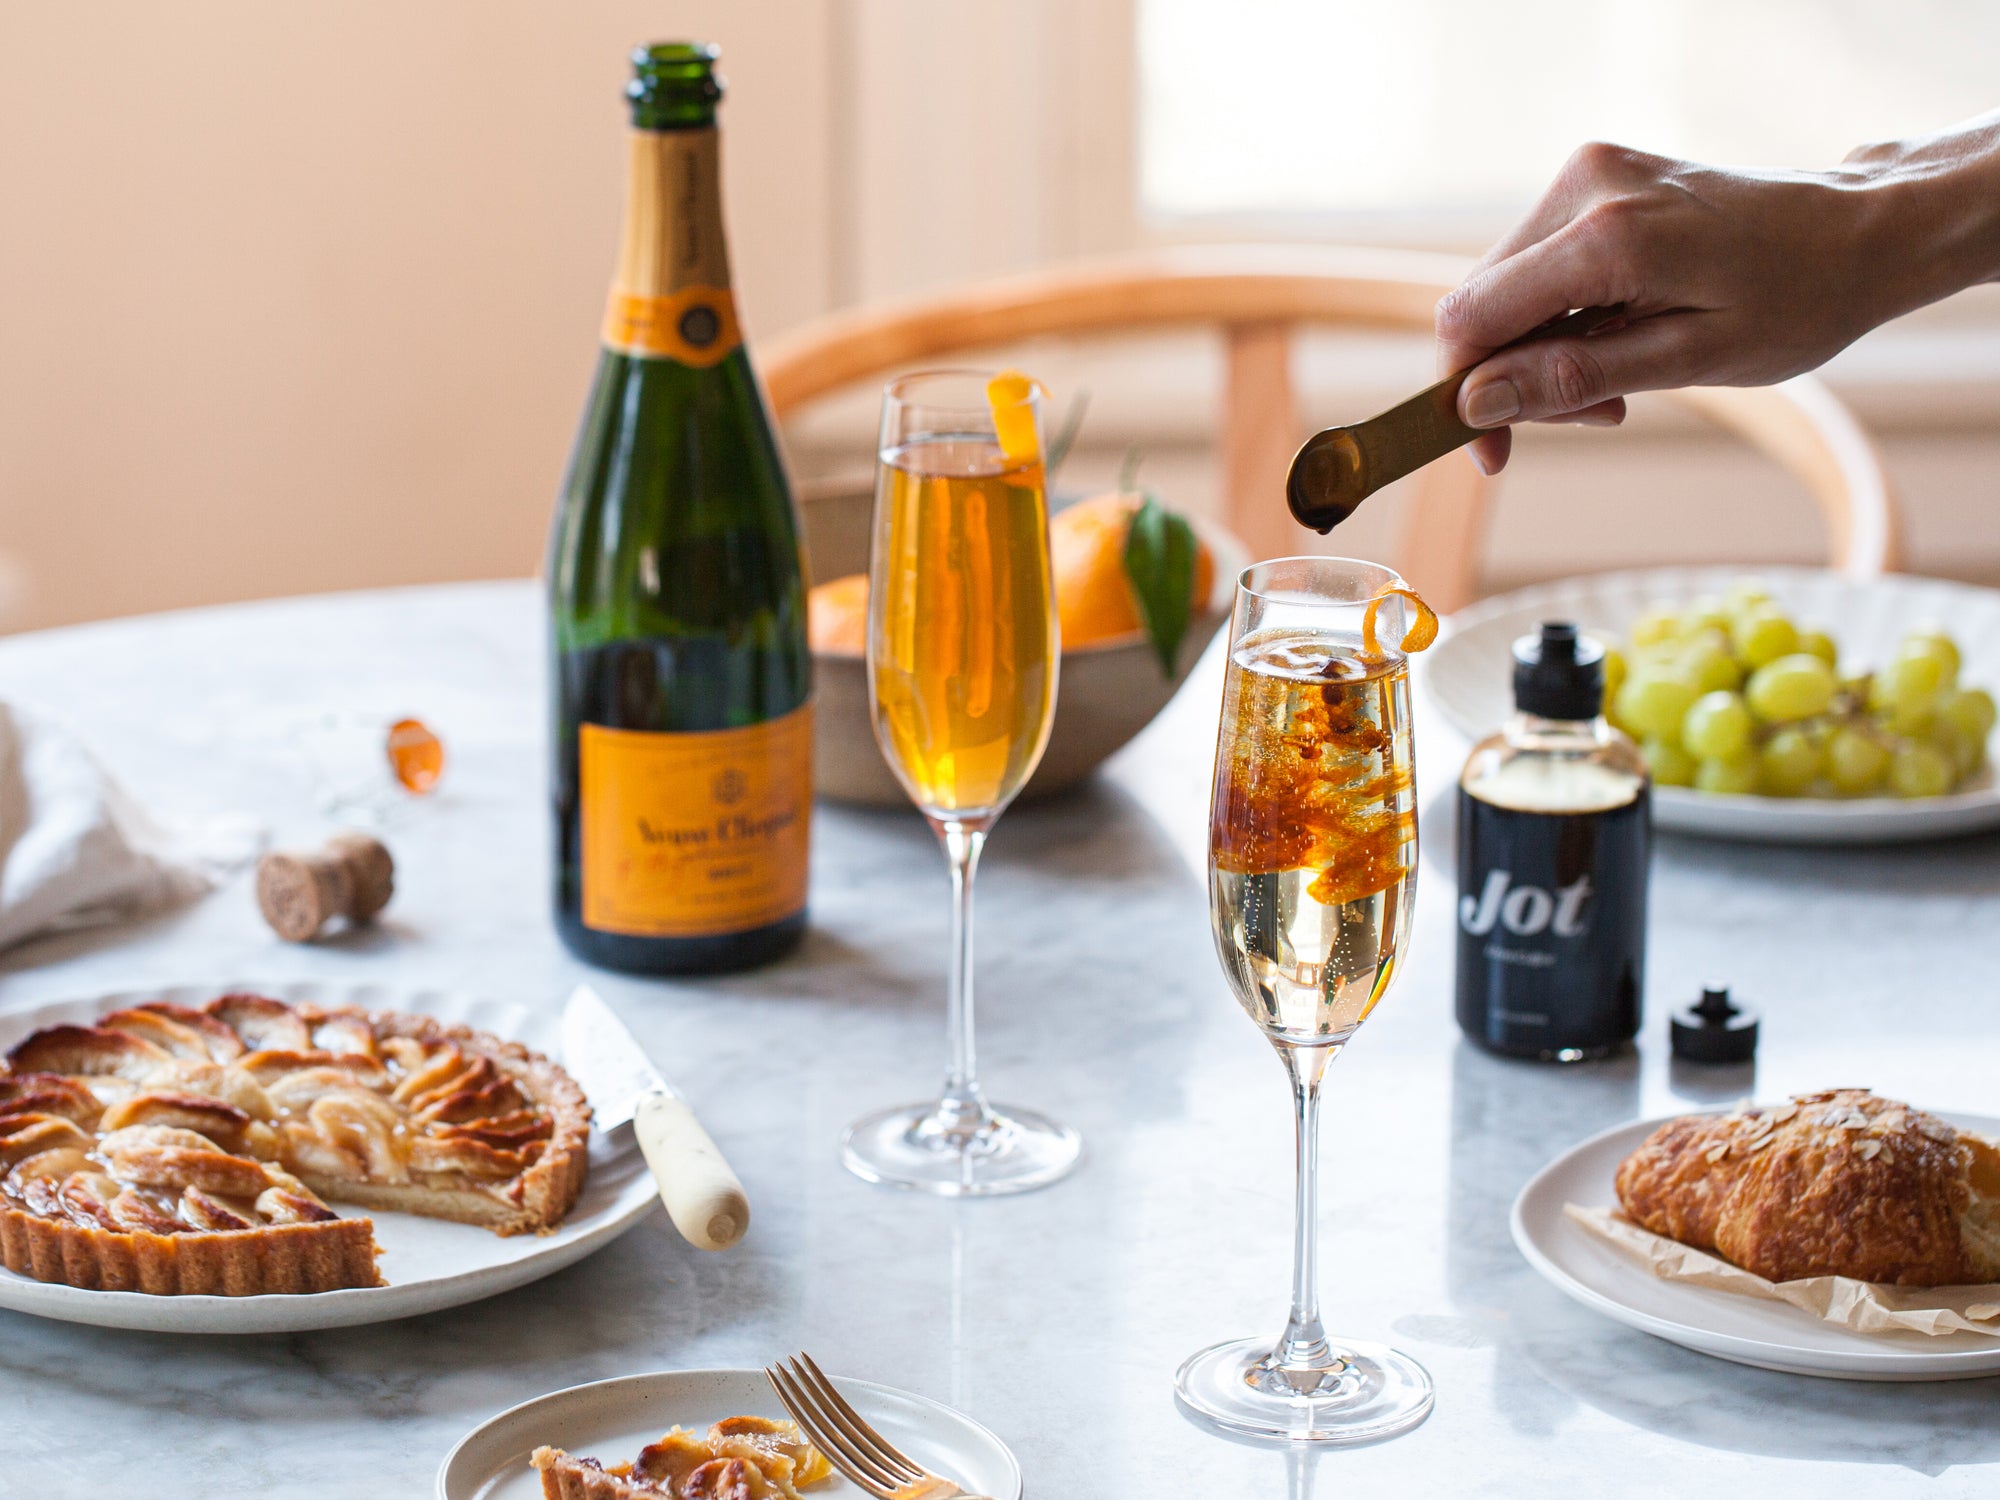 How to make the best New Year's brunch cocktail: the Ultra Coffee Mimosa